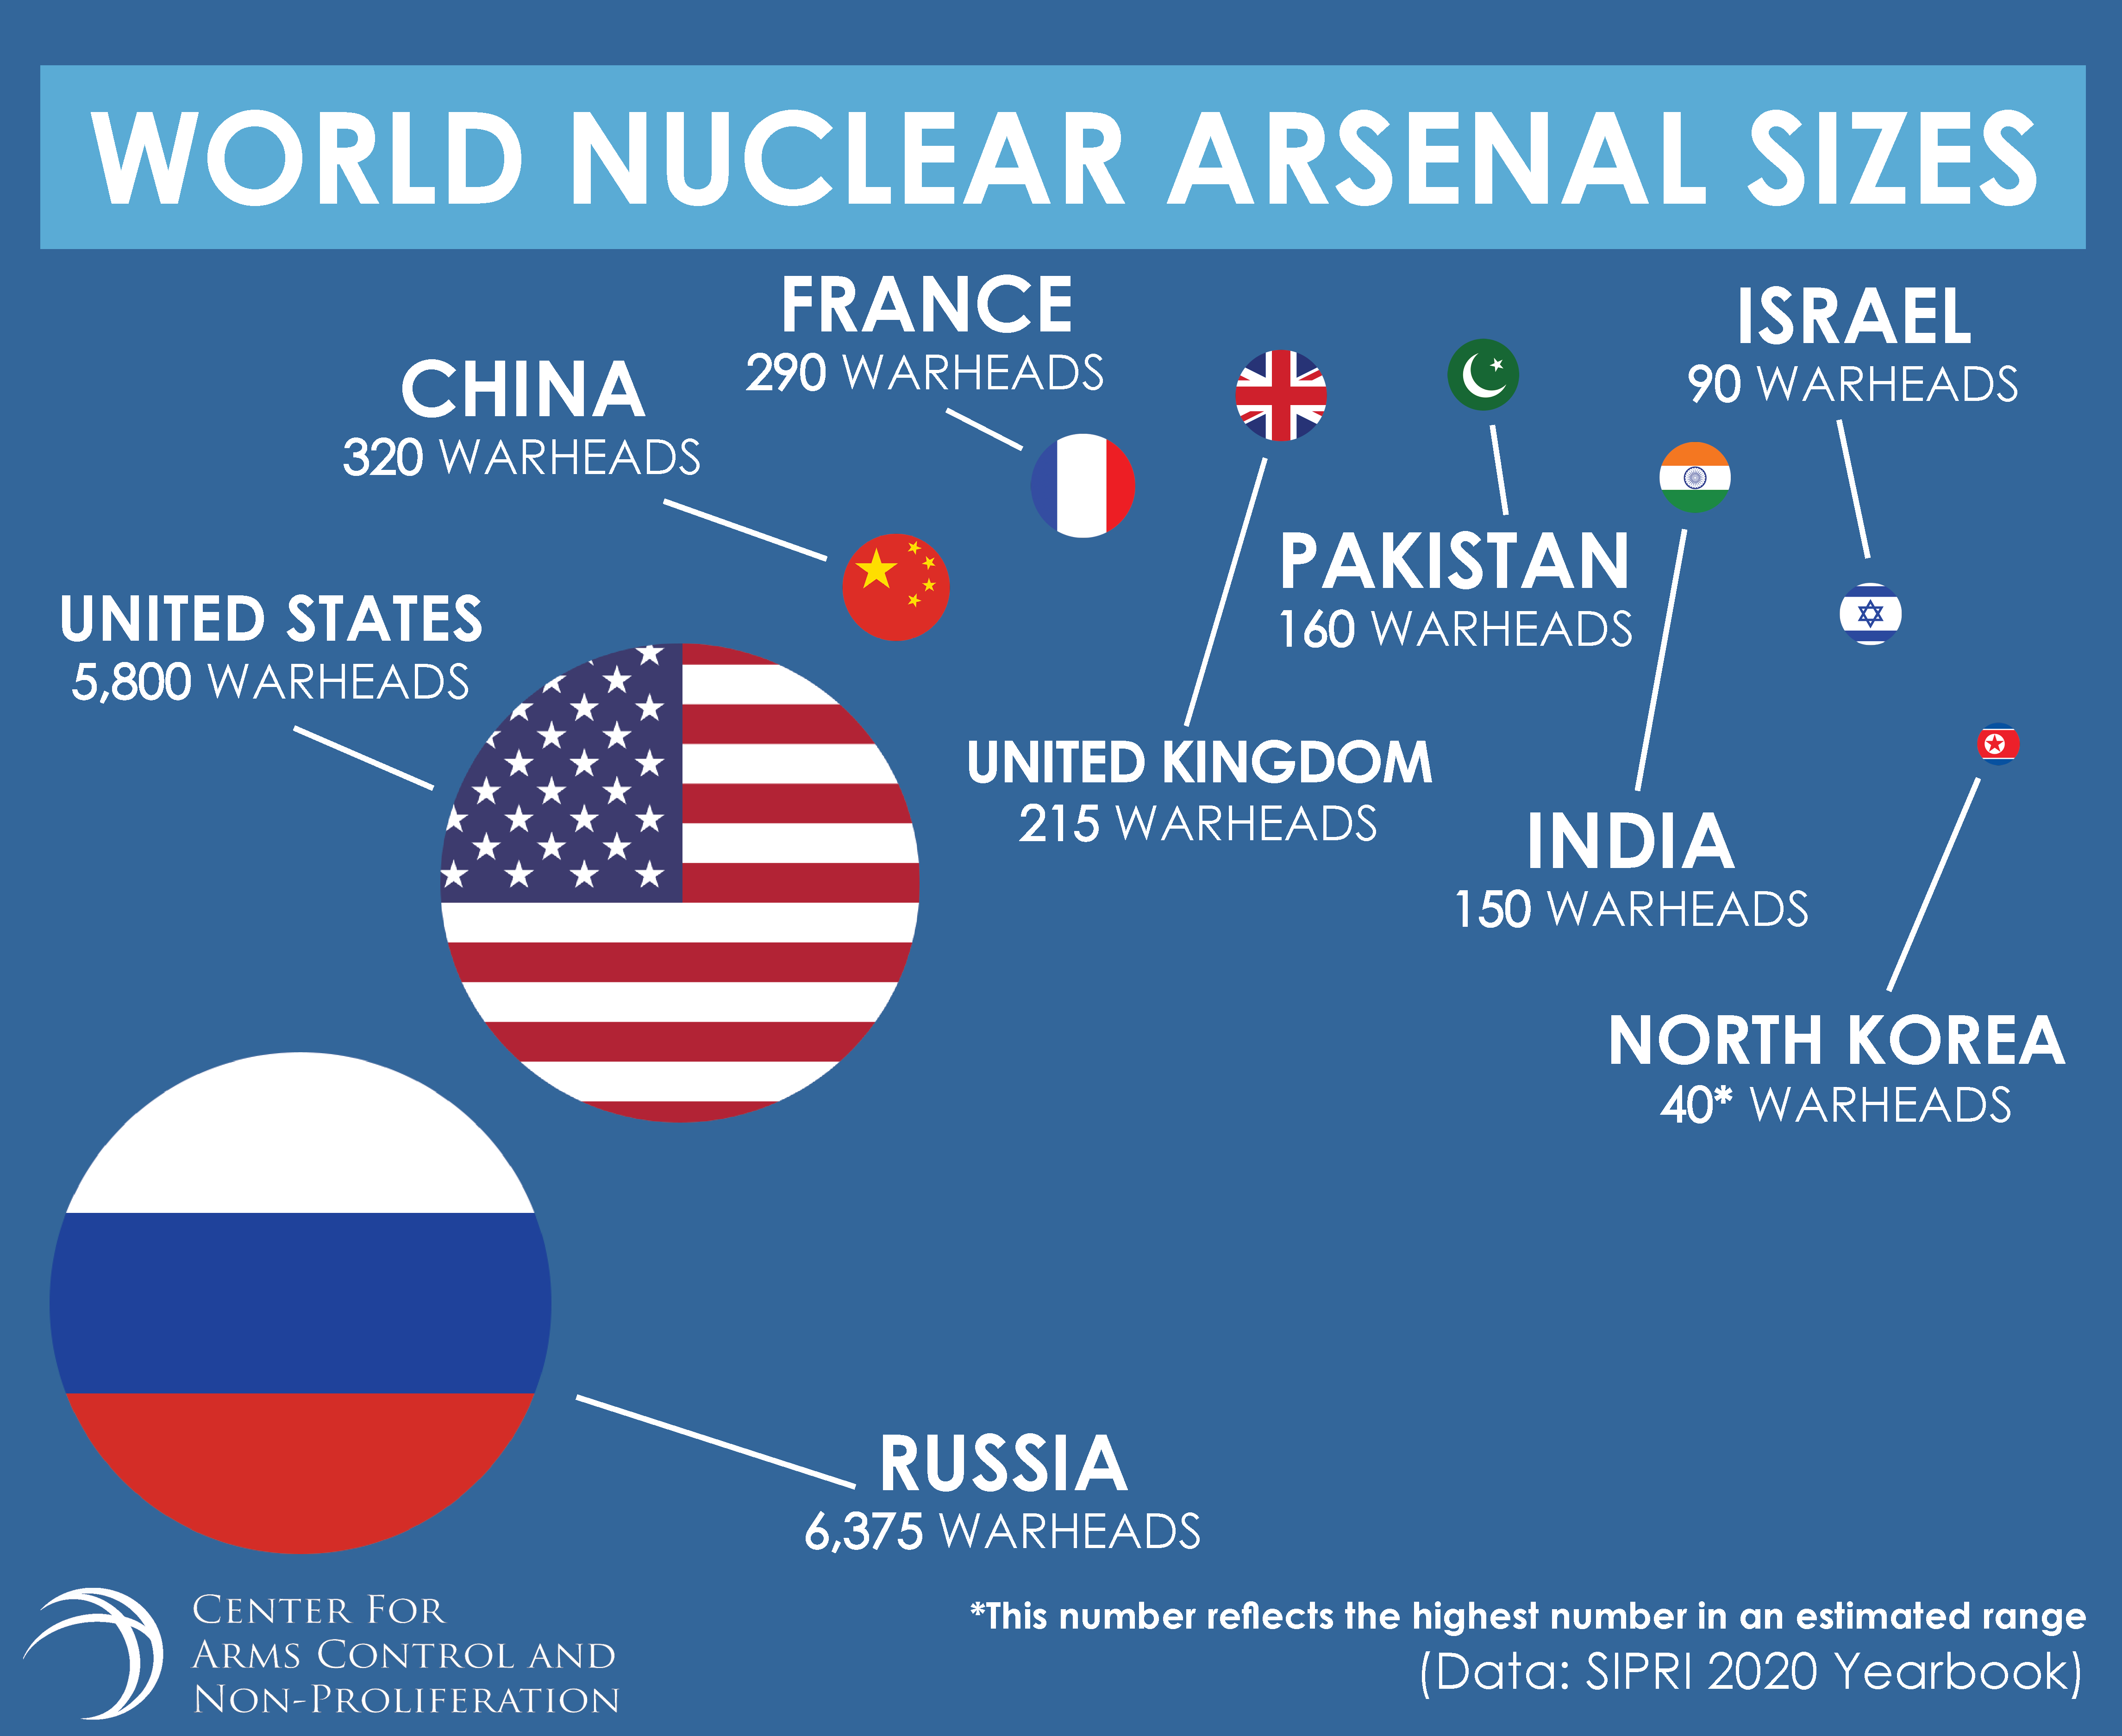 World nuclear arsenal sizes - Center for Arms Control and Non-Proliferation